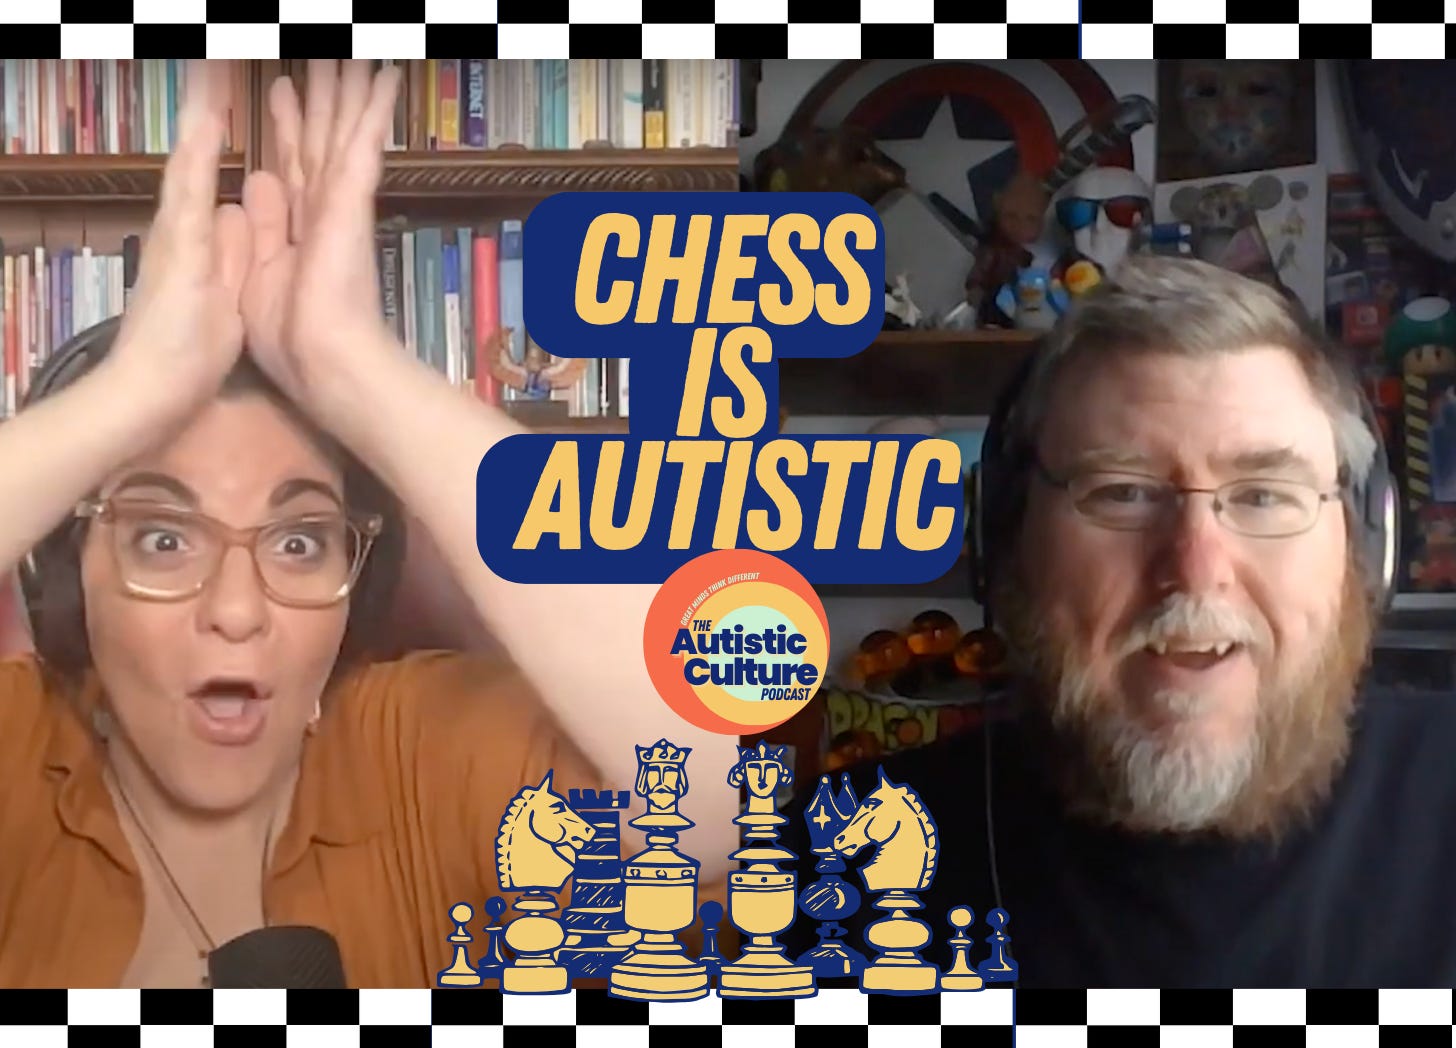 Listen to Autistic podcast hosts discuss: Chess is Autistic. Autism episodes | Checkmate your assumptions as we explore the fascinating interplay between chess and Autistic Culture in this game-changing episode. Learn about Autistic celebrities and one of the all-time most popular Autistic activities.